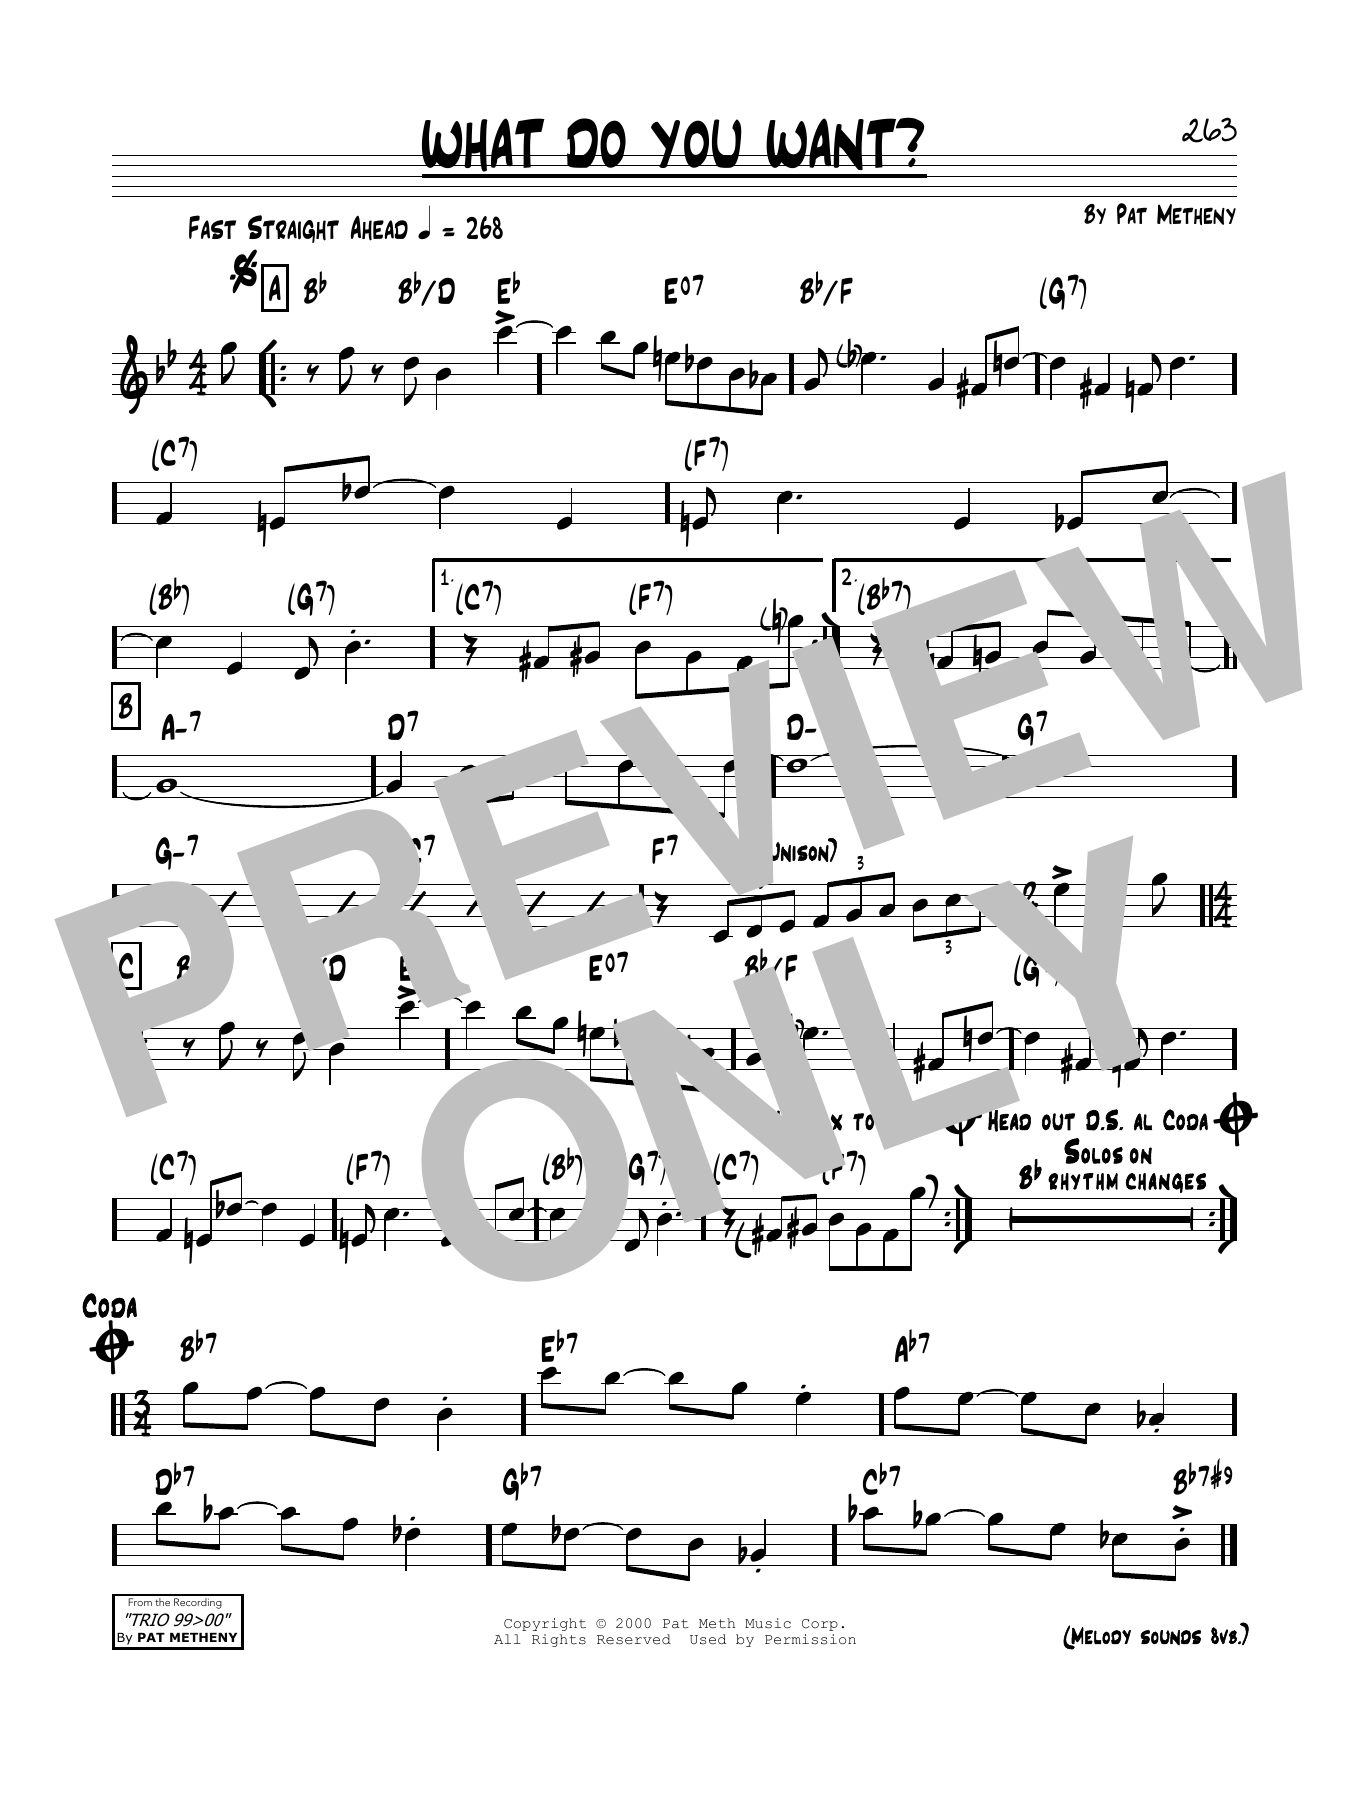 Download Pat Metheny What Do You Want? Sheet Music